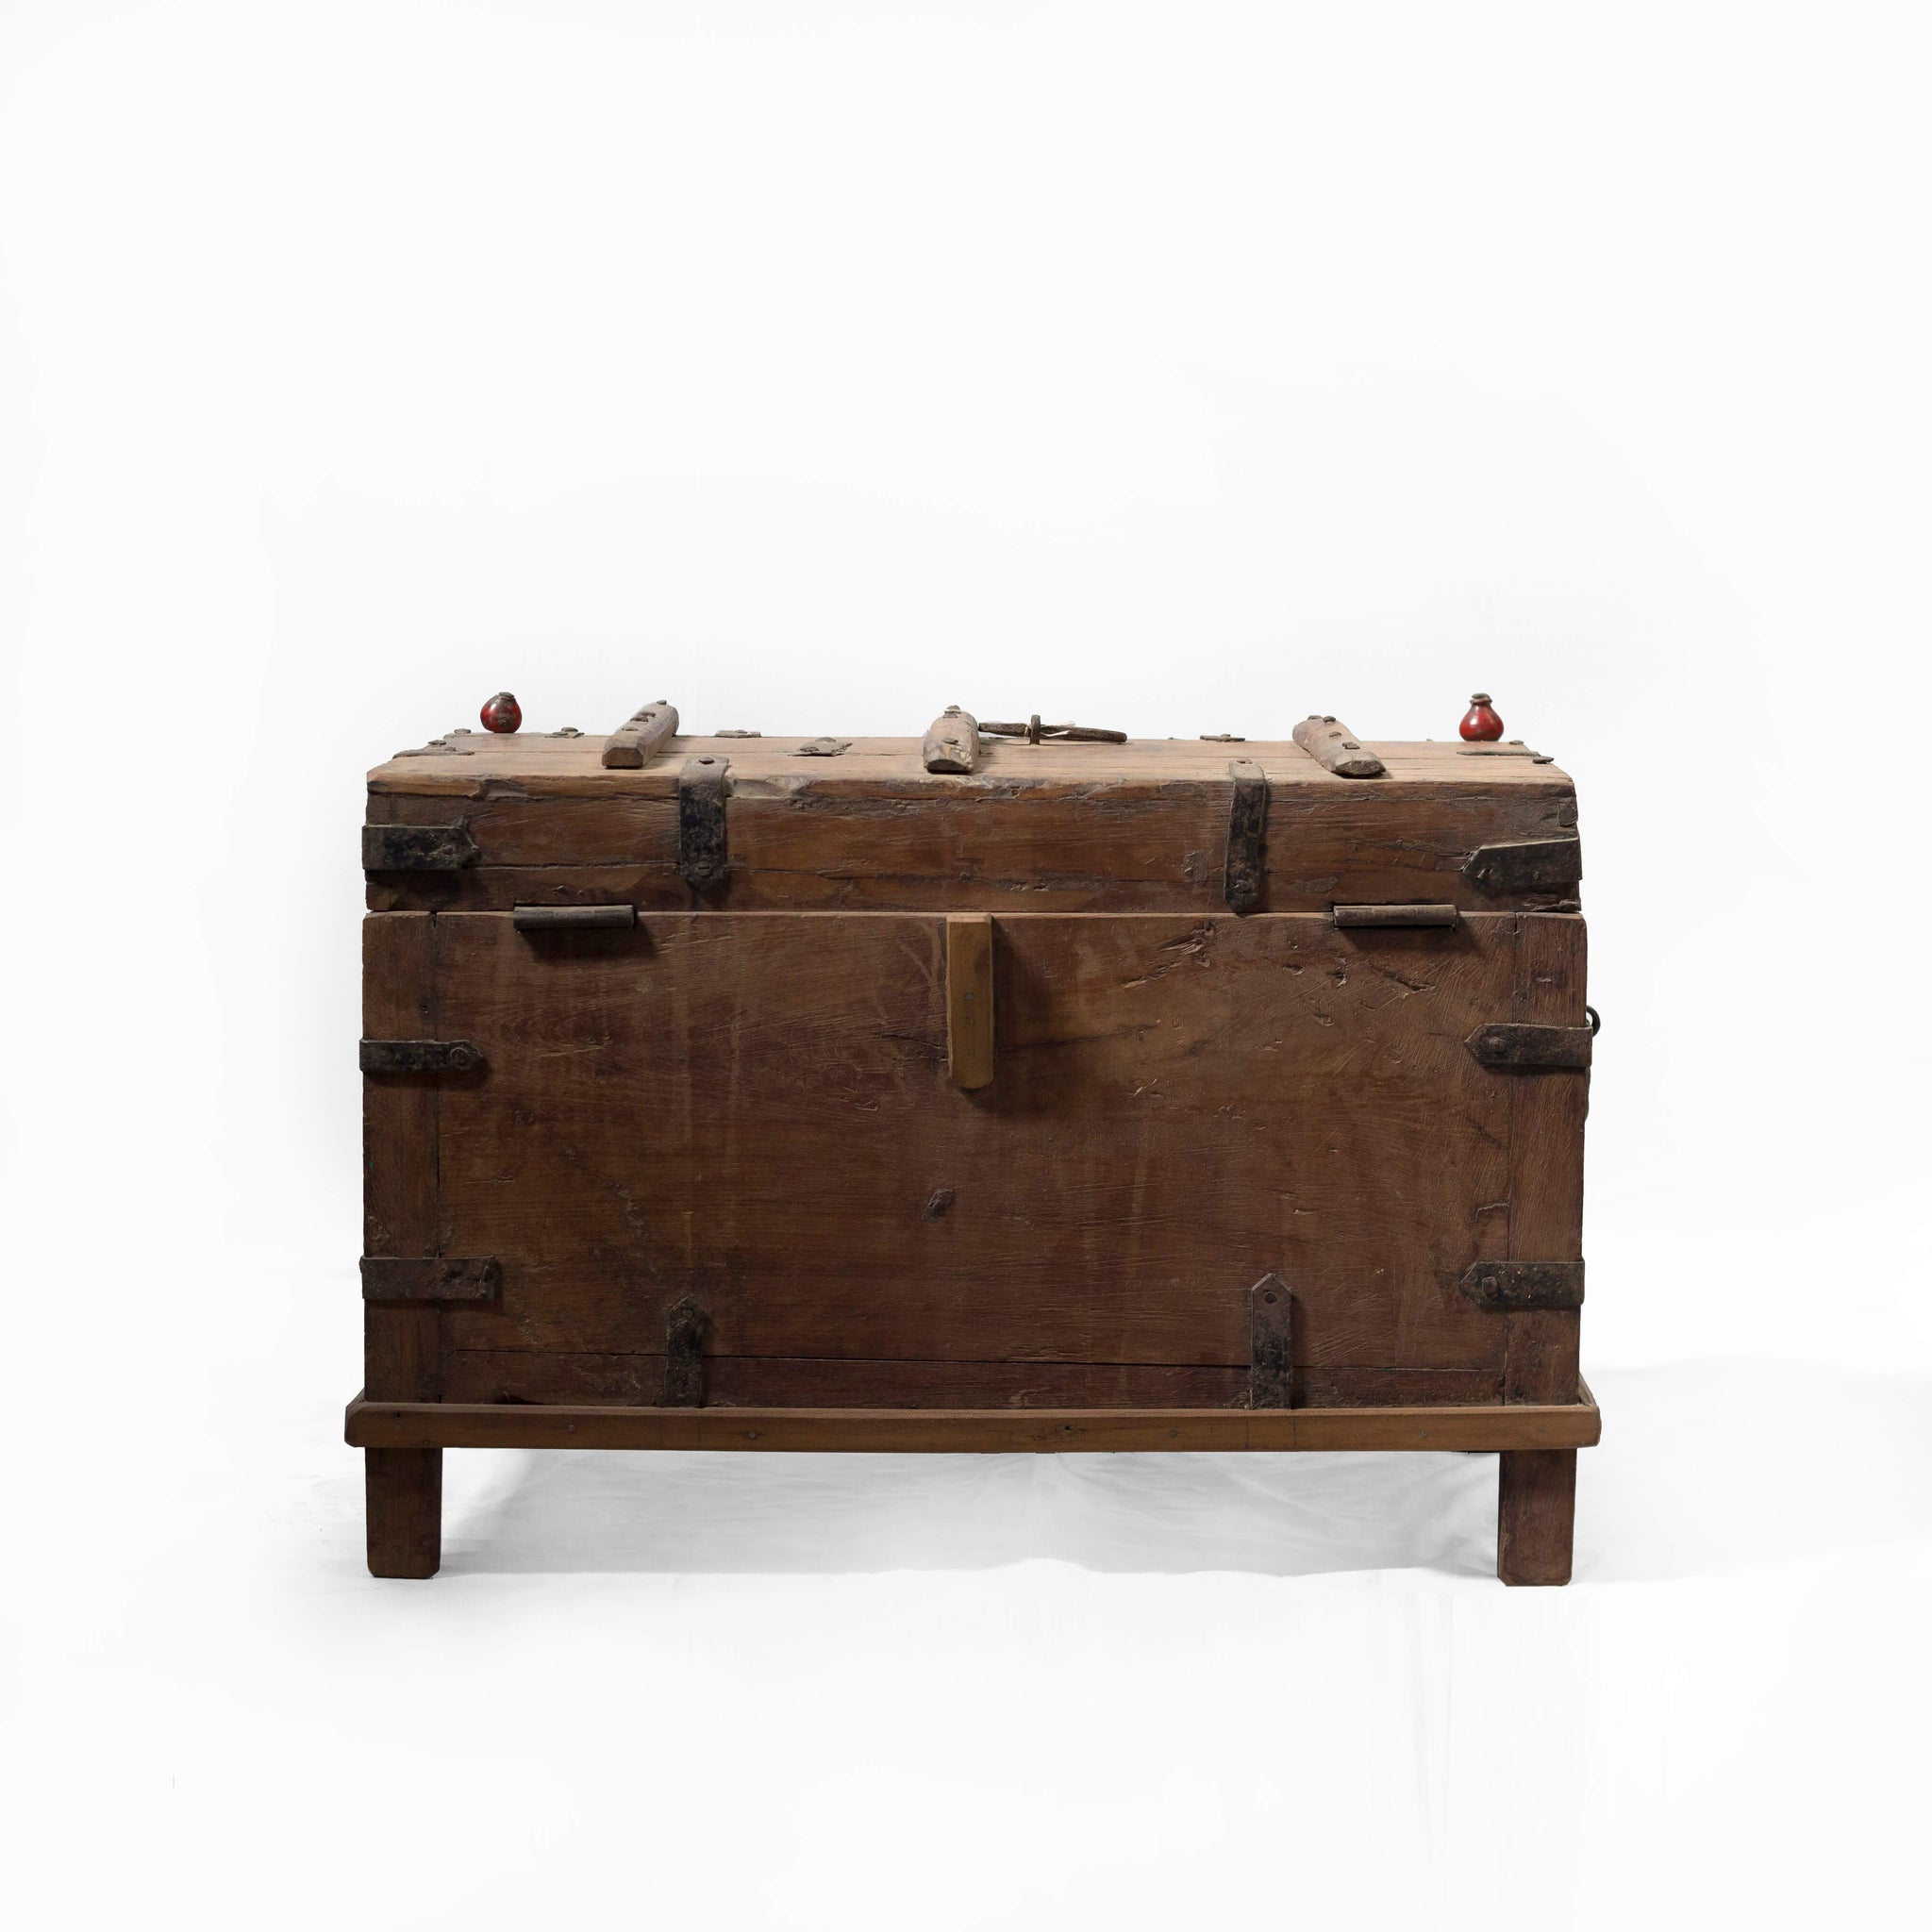 RUGGED WOODEN CHEST